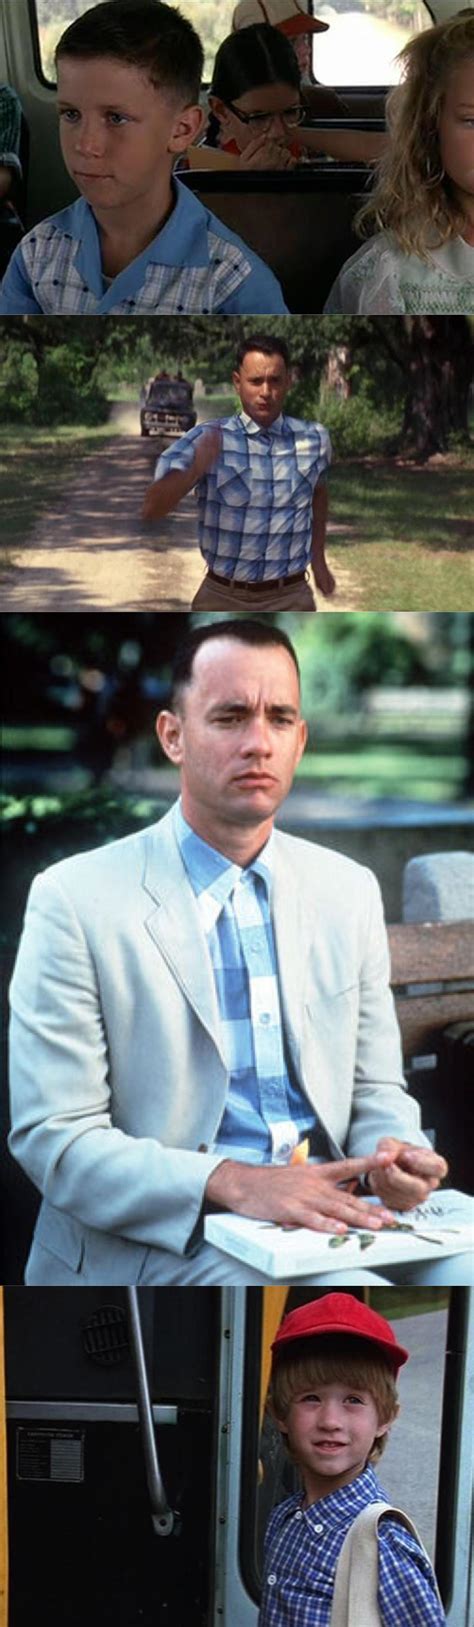 In Forrest Gump 1994 Forrest Wears A Blue Plaid Shirt In The First